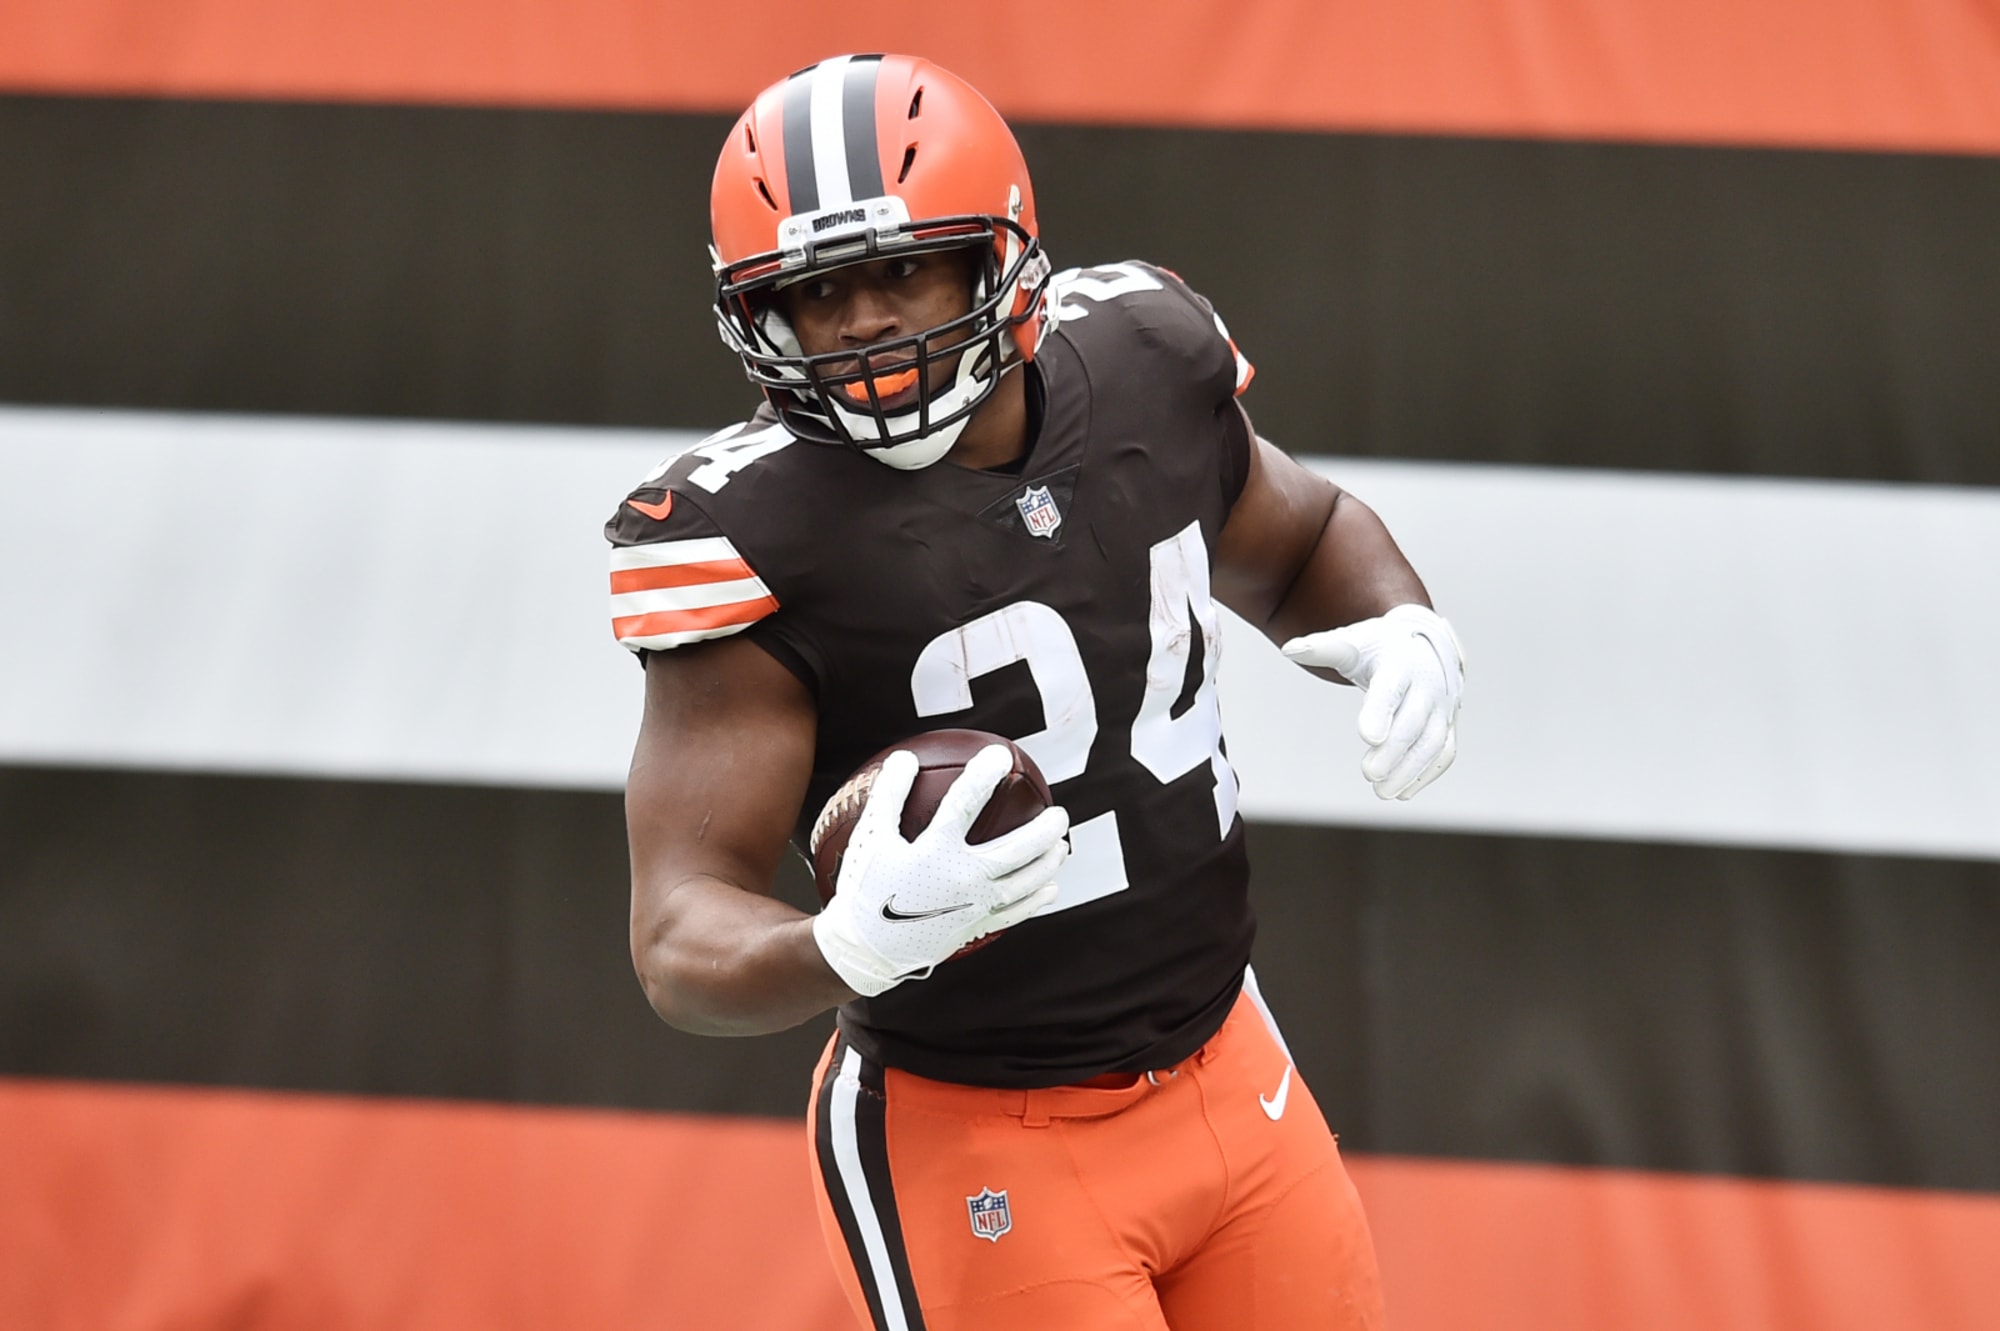 Nick Chubb well suited to 2021 NFL rushing champion